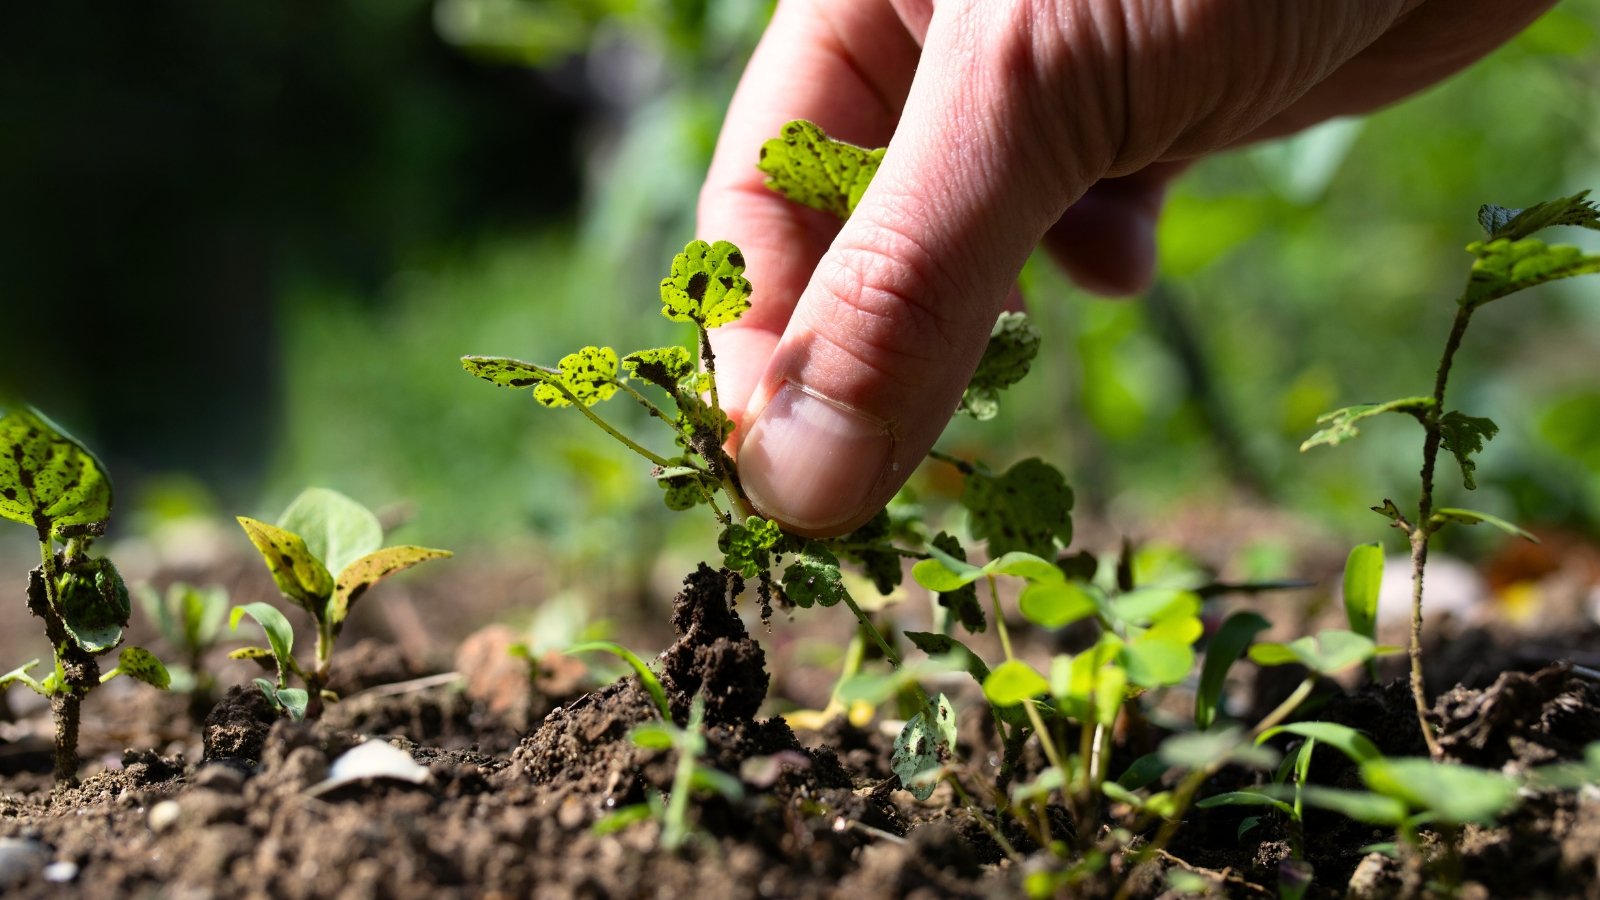 Close-up of a gardener's hand pulling a tiny weed out of the soil in a garden bed.